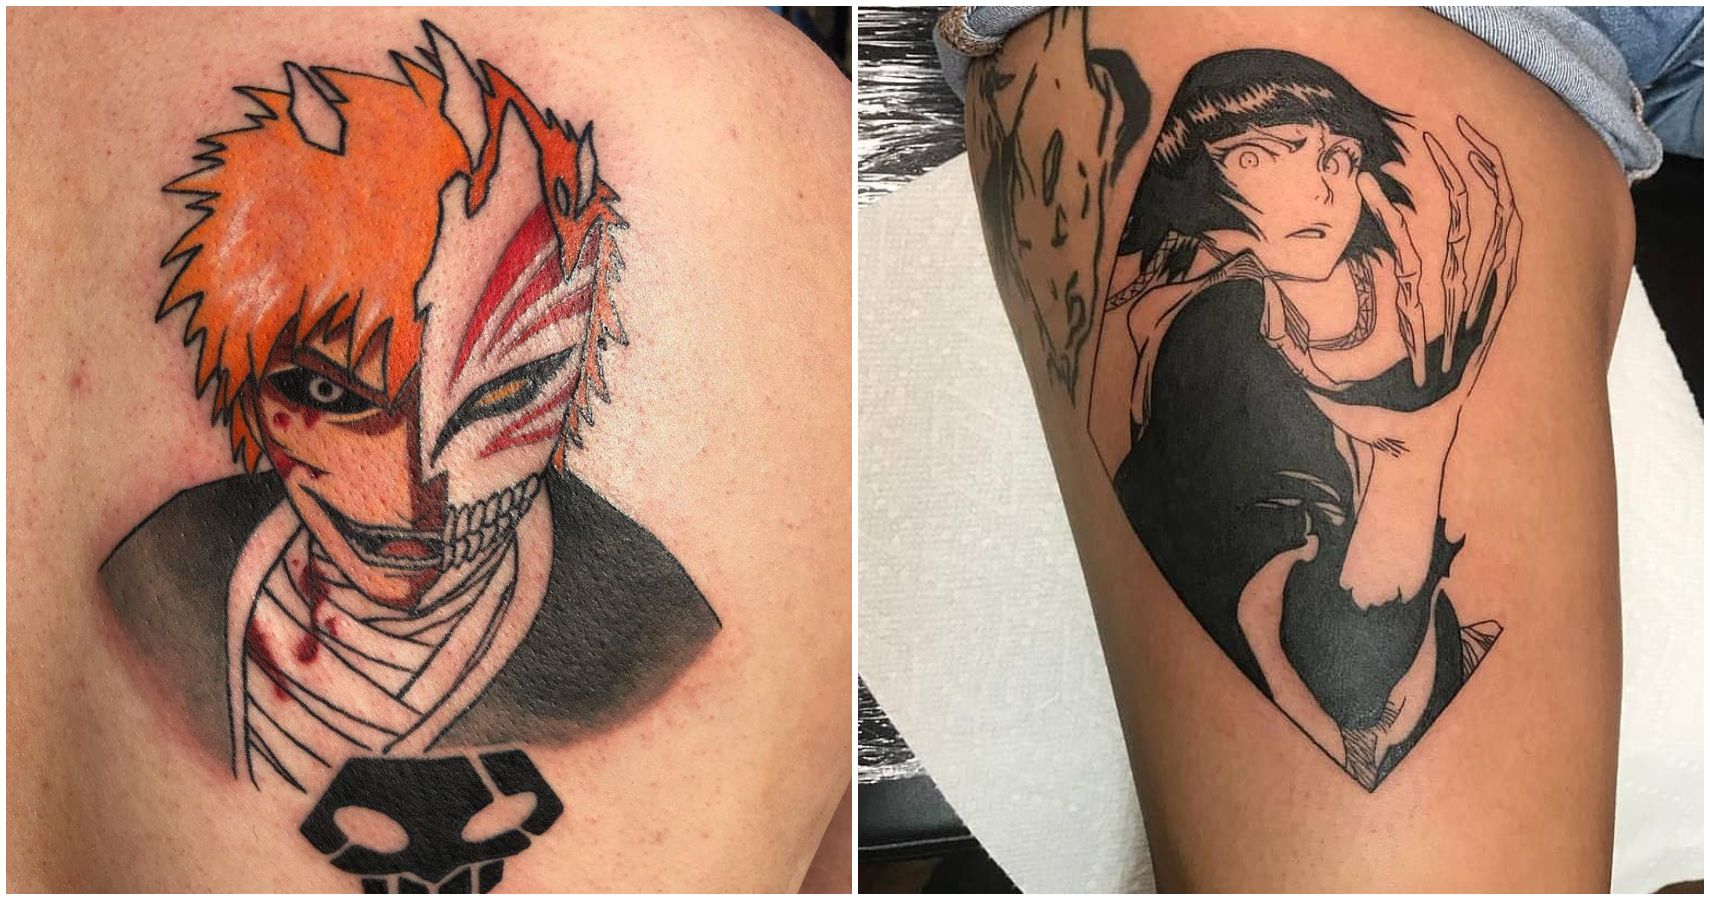 Bleach 10 Amazing Tattoos To Inspire Your New Ink CBR.